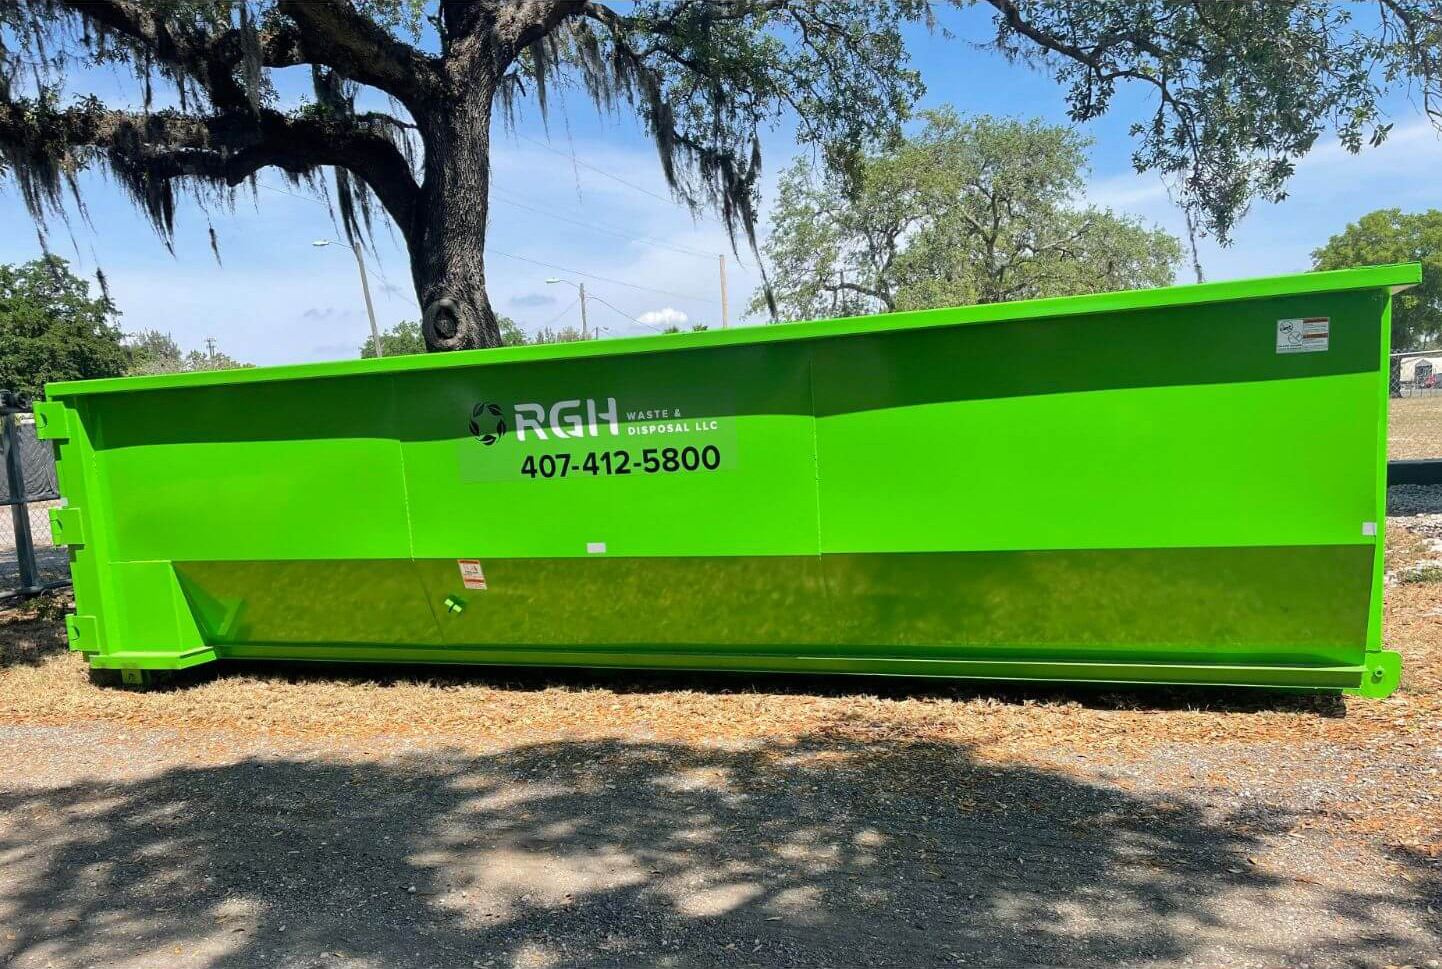 What Are the Benefits of Hiring a Roll Off Dumpster Rental Service?